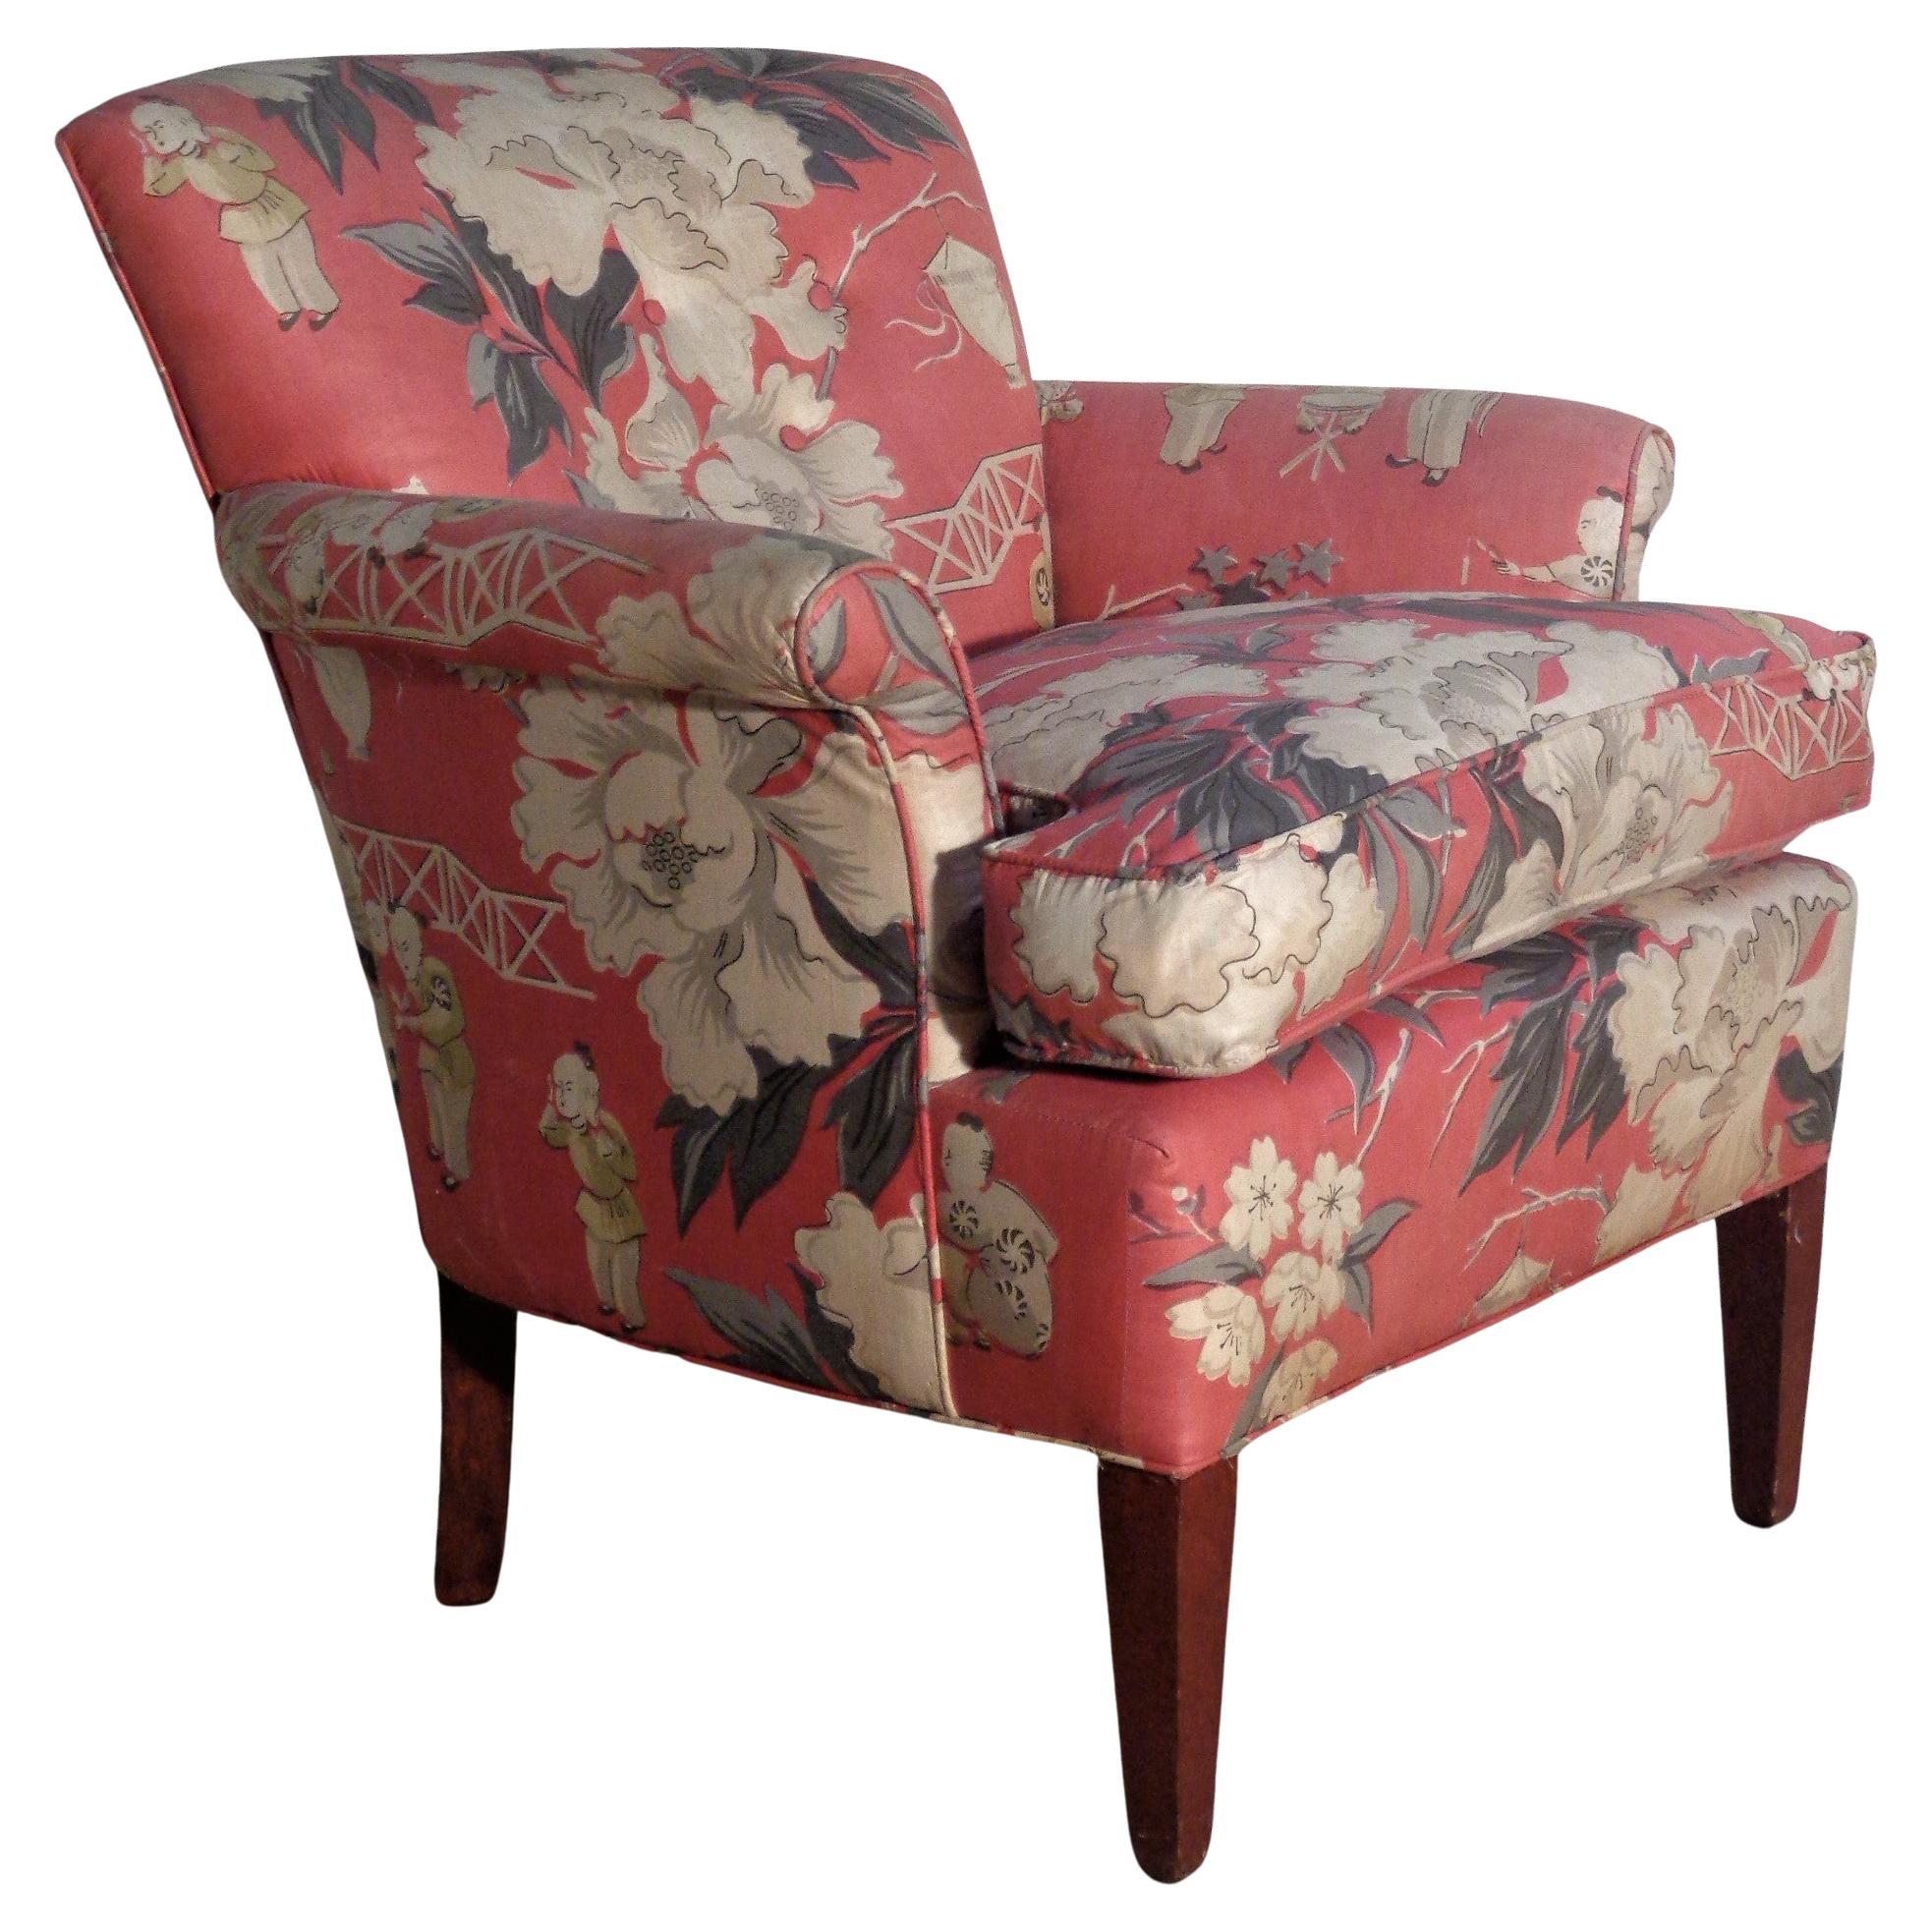  Dorothy Draper Style Original Chinoiserie Upholstered Lounge Chair, 1940's For Sale 1